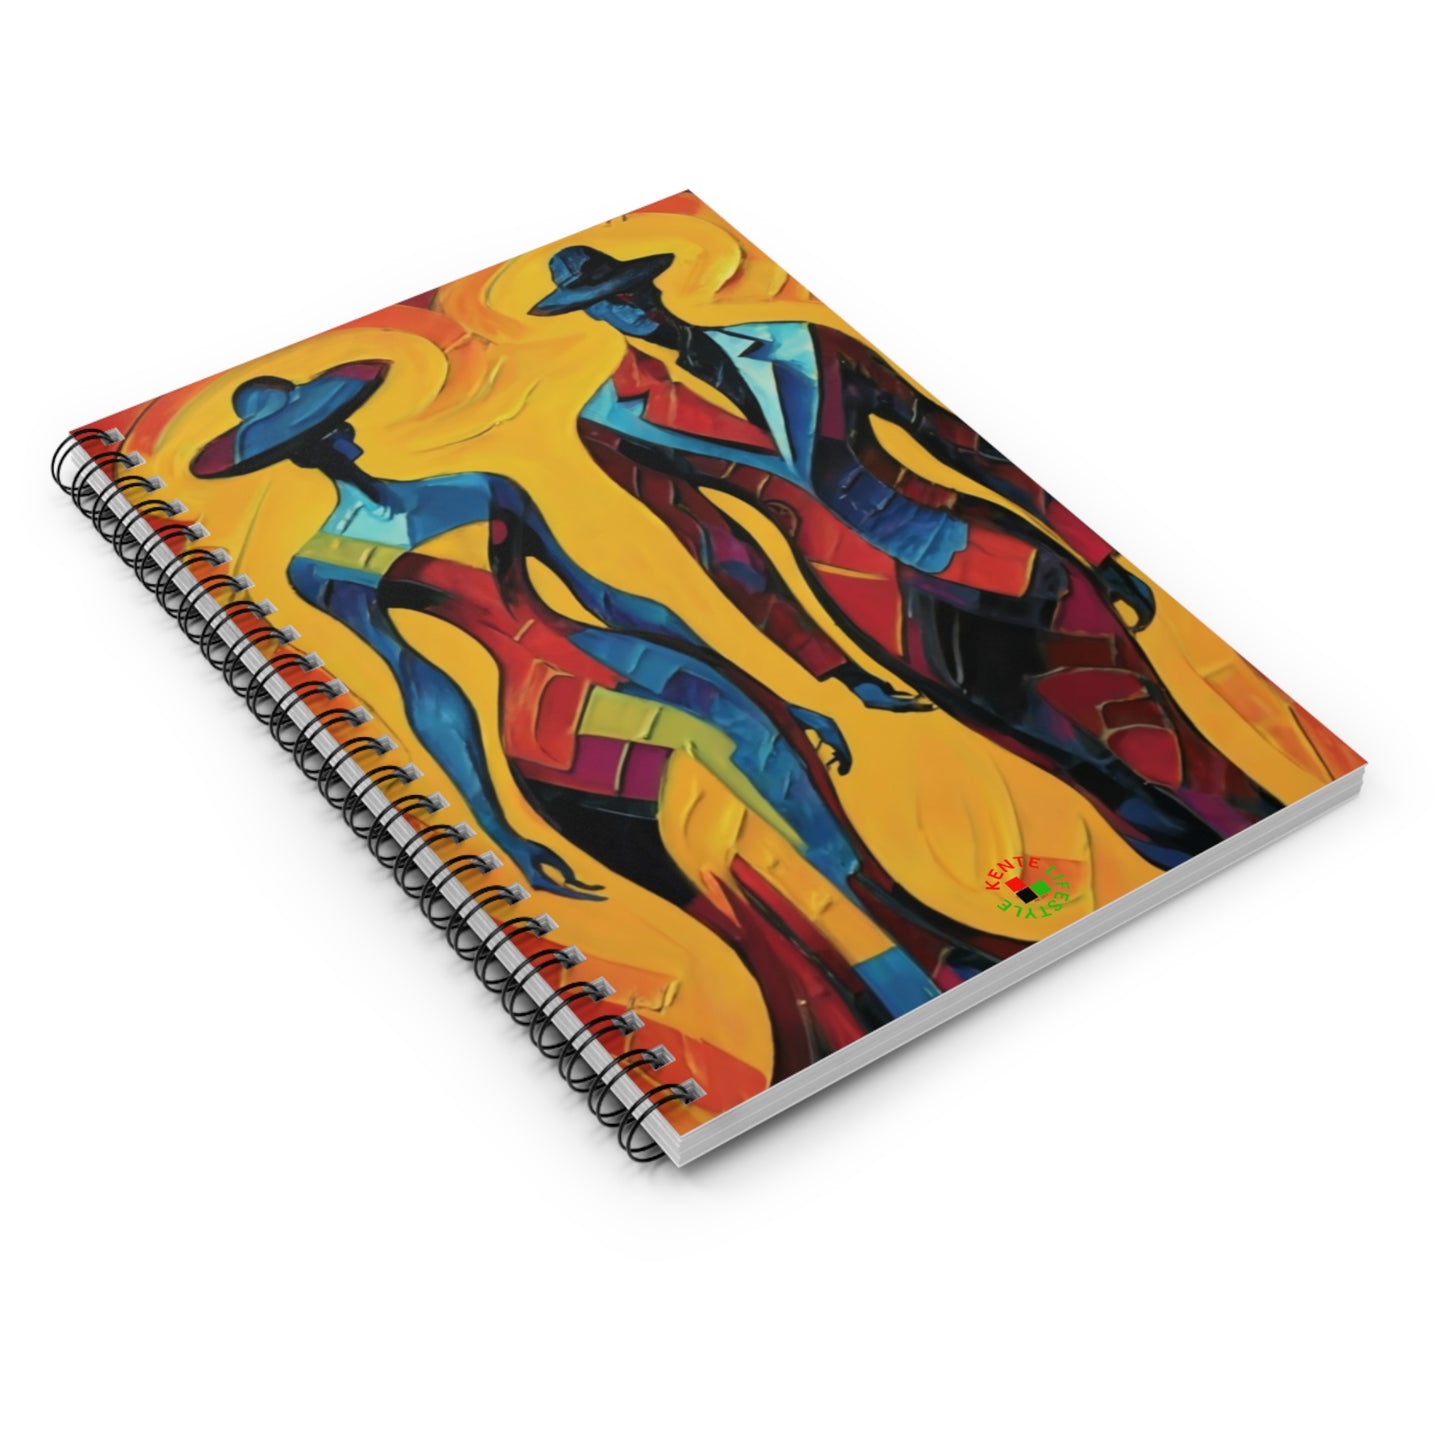 "Stepping Out" Spiral Notebook (Ruled Line)